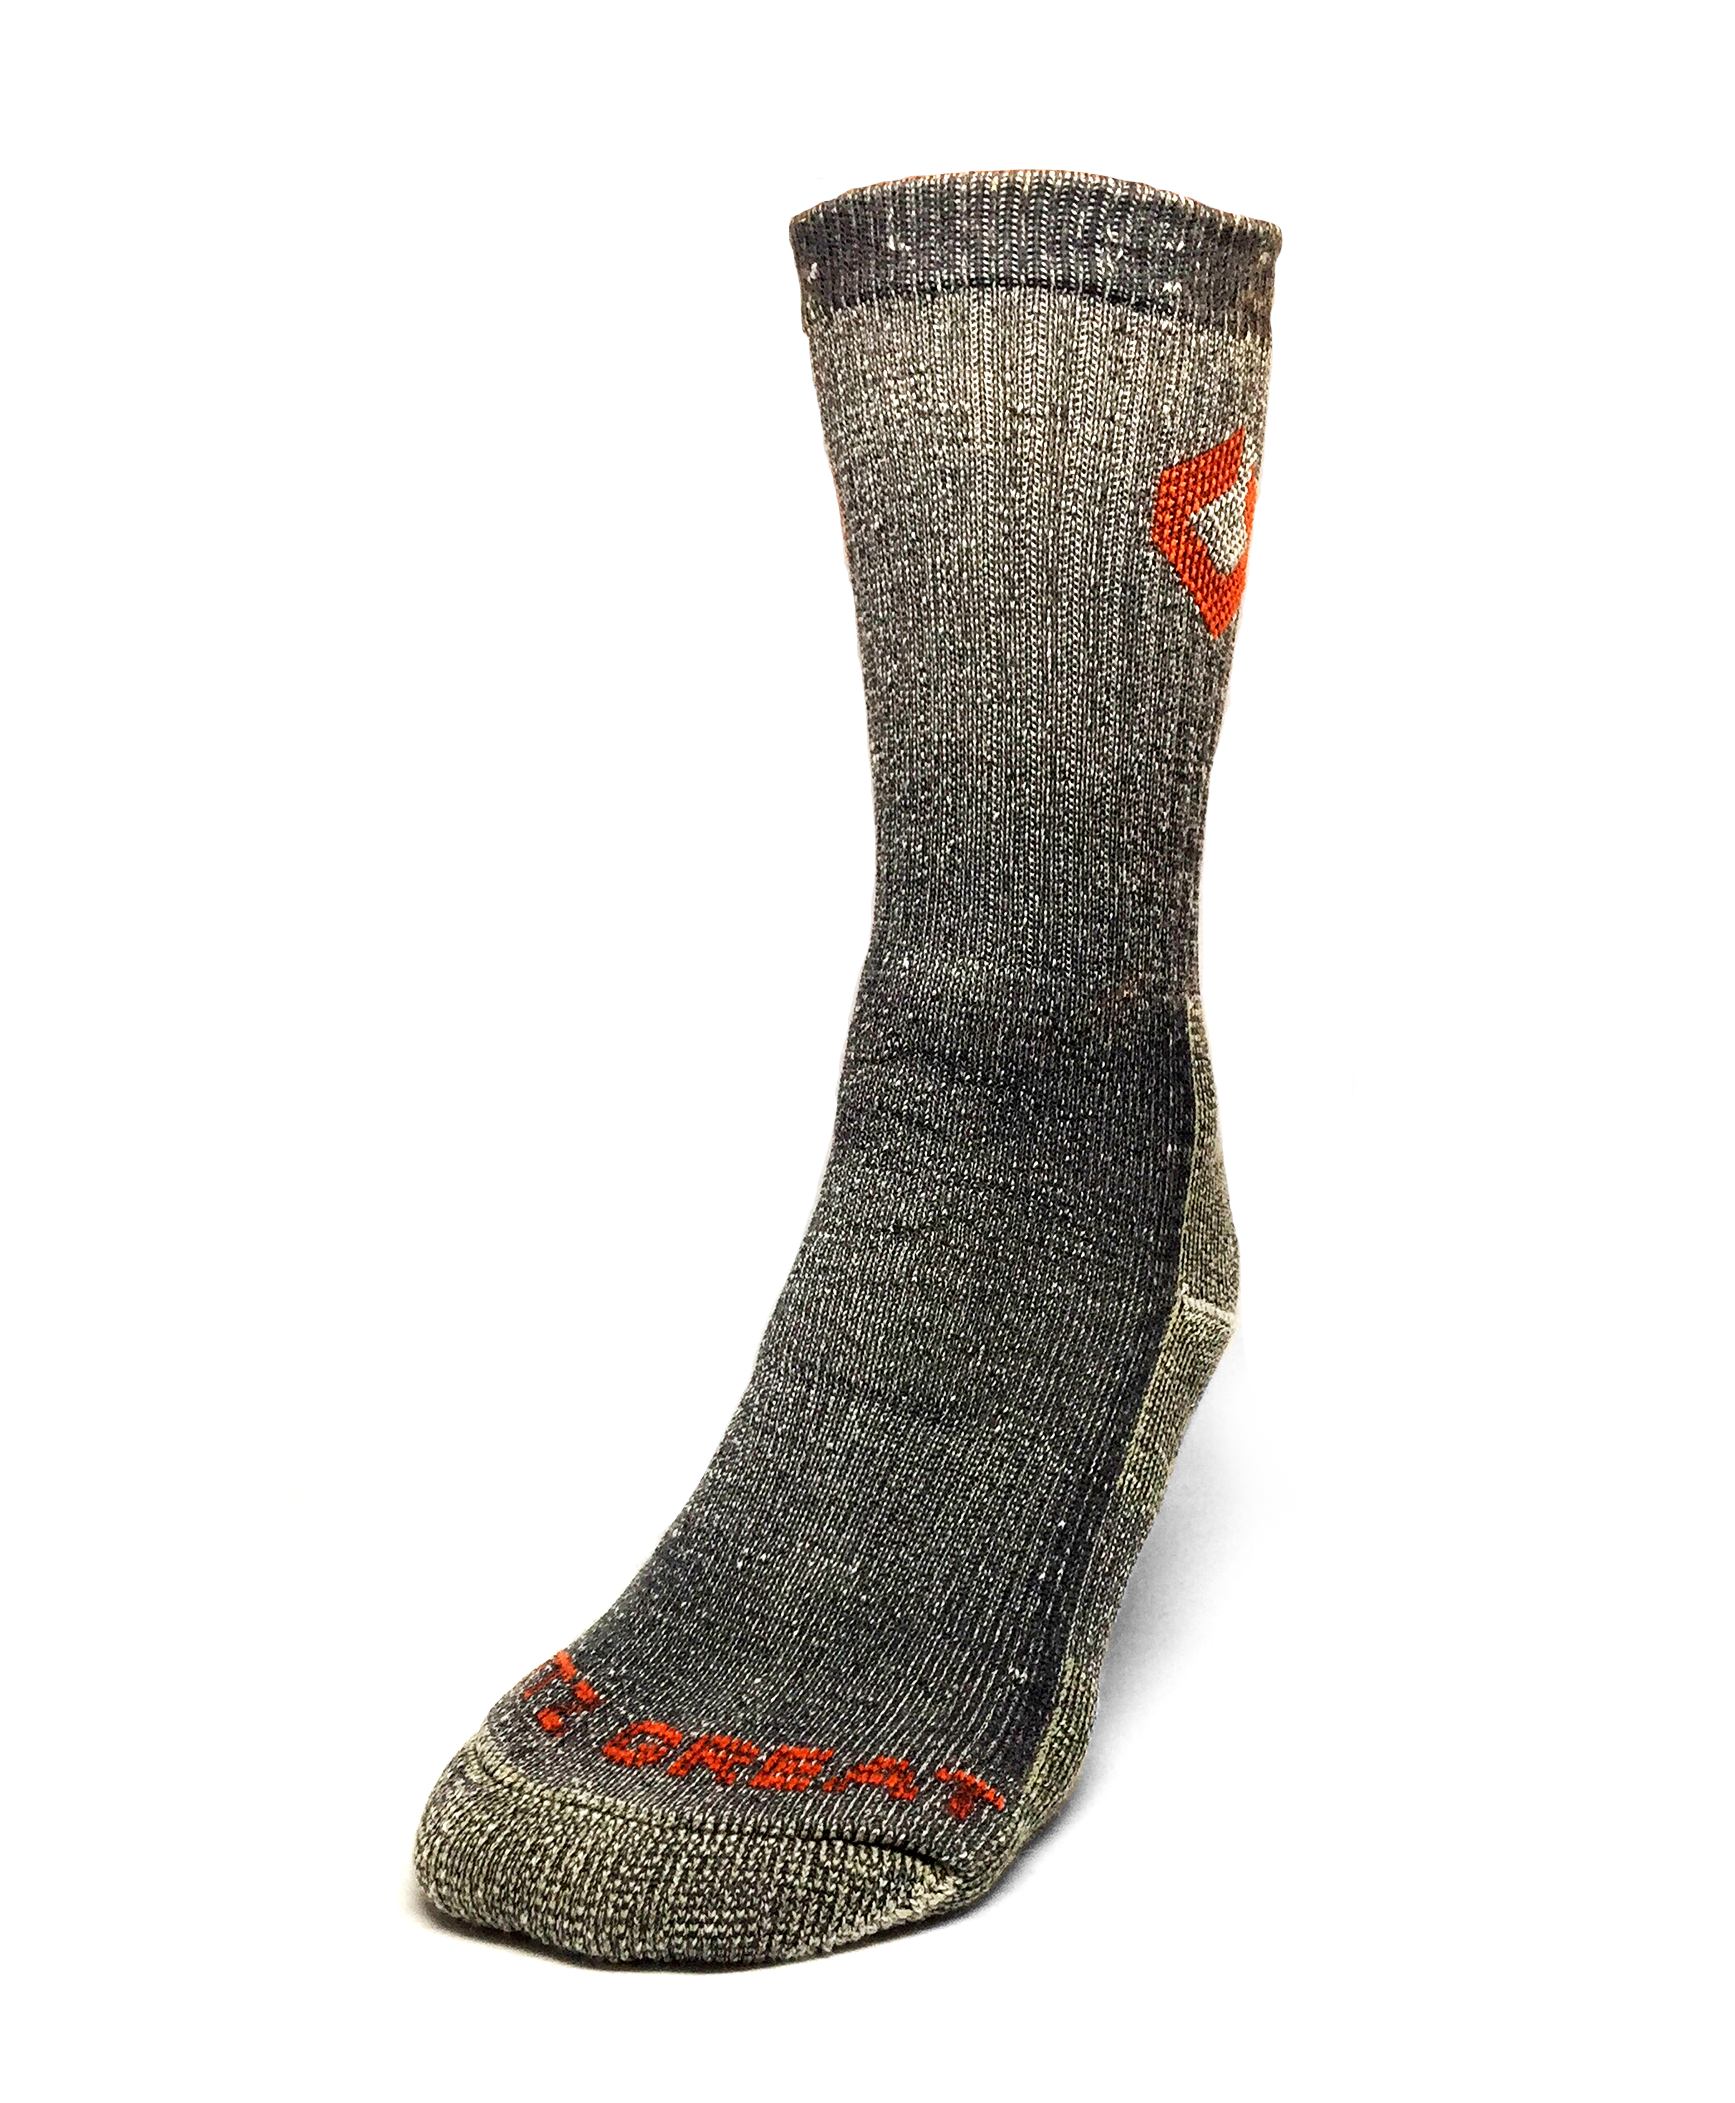 High-Tech Socks with Copptech yarn size 6-8 (1 pair)